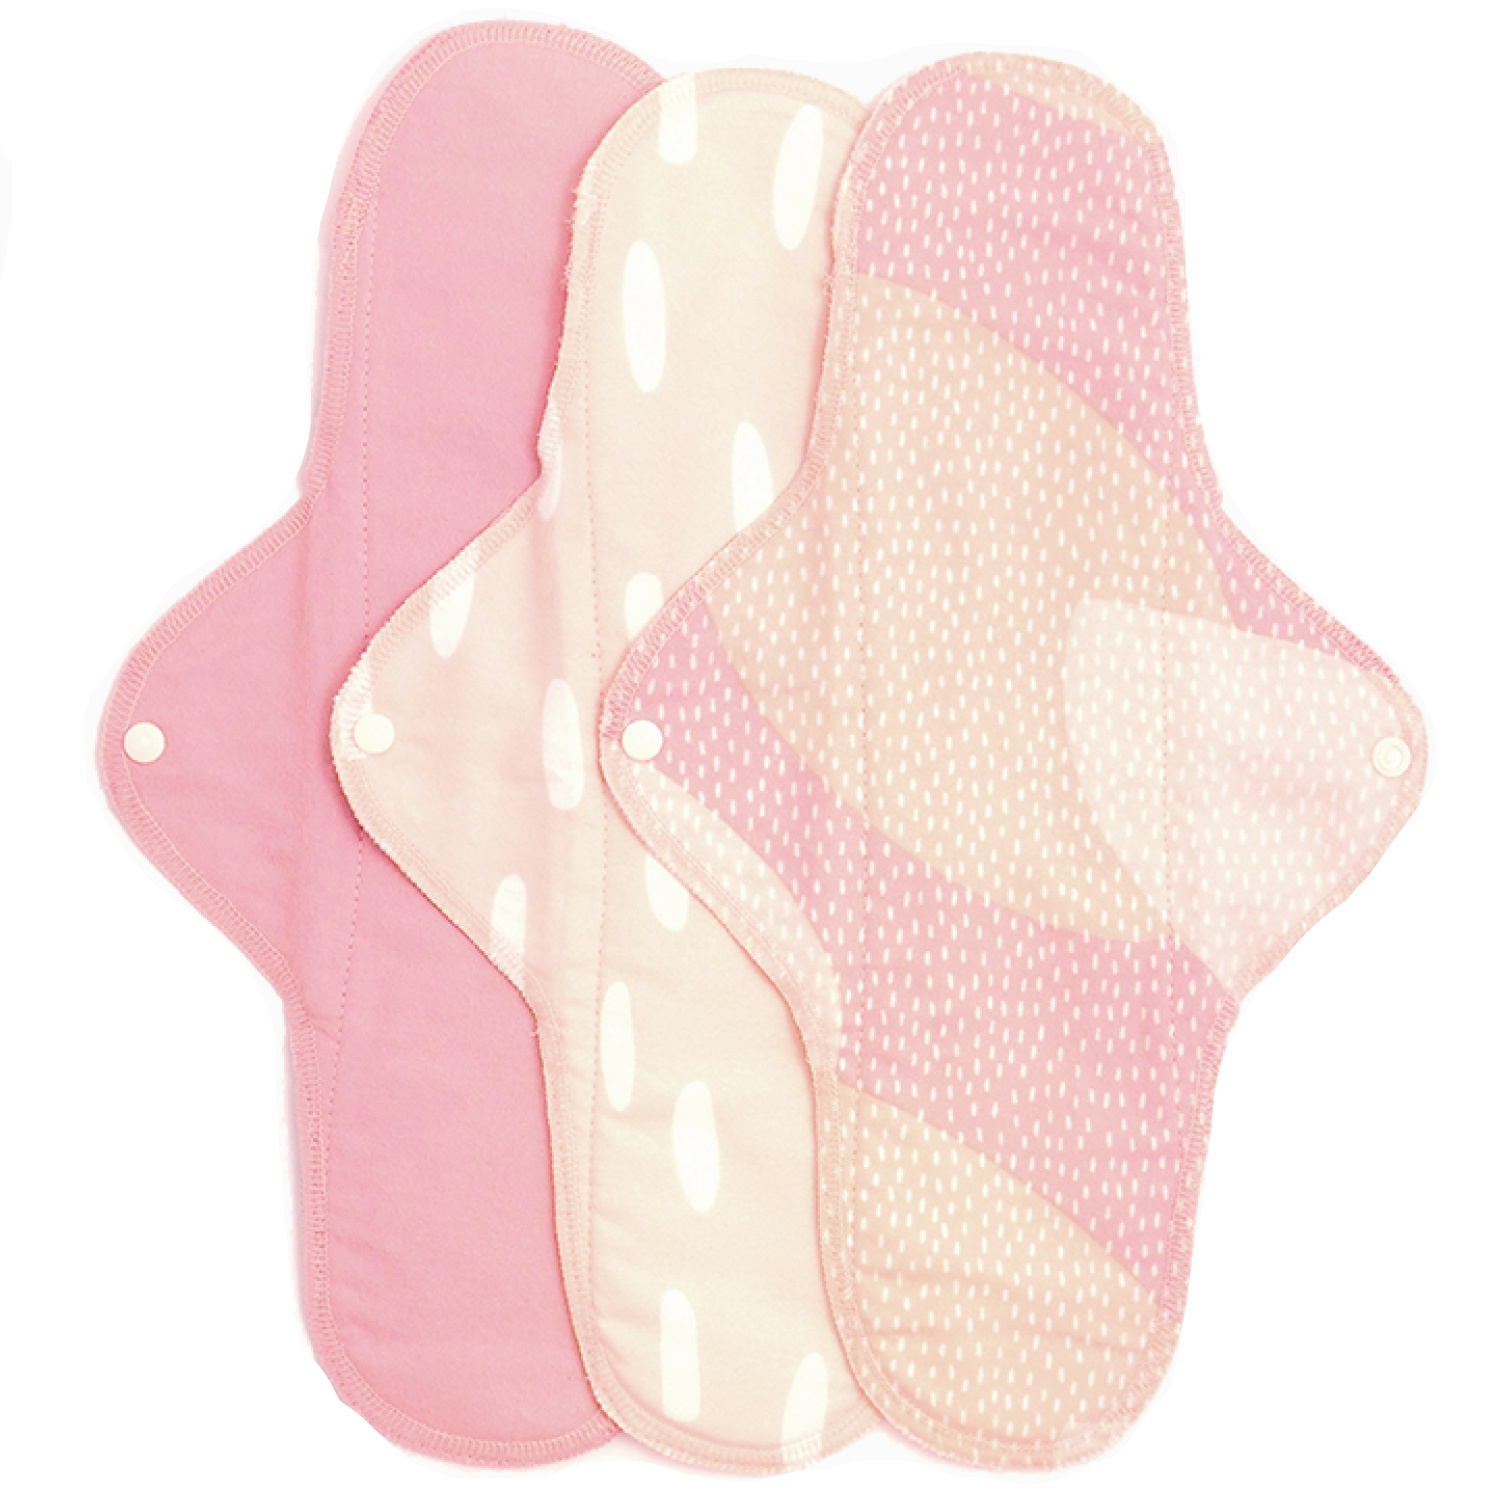 Imse Panty Liners & Cloth Pads (Classic) - 3 Pk